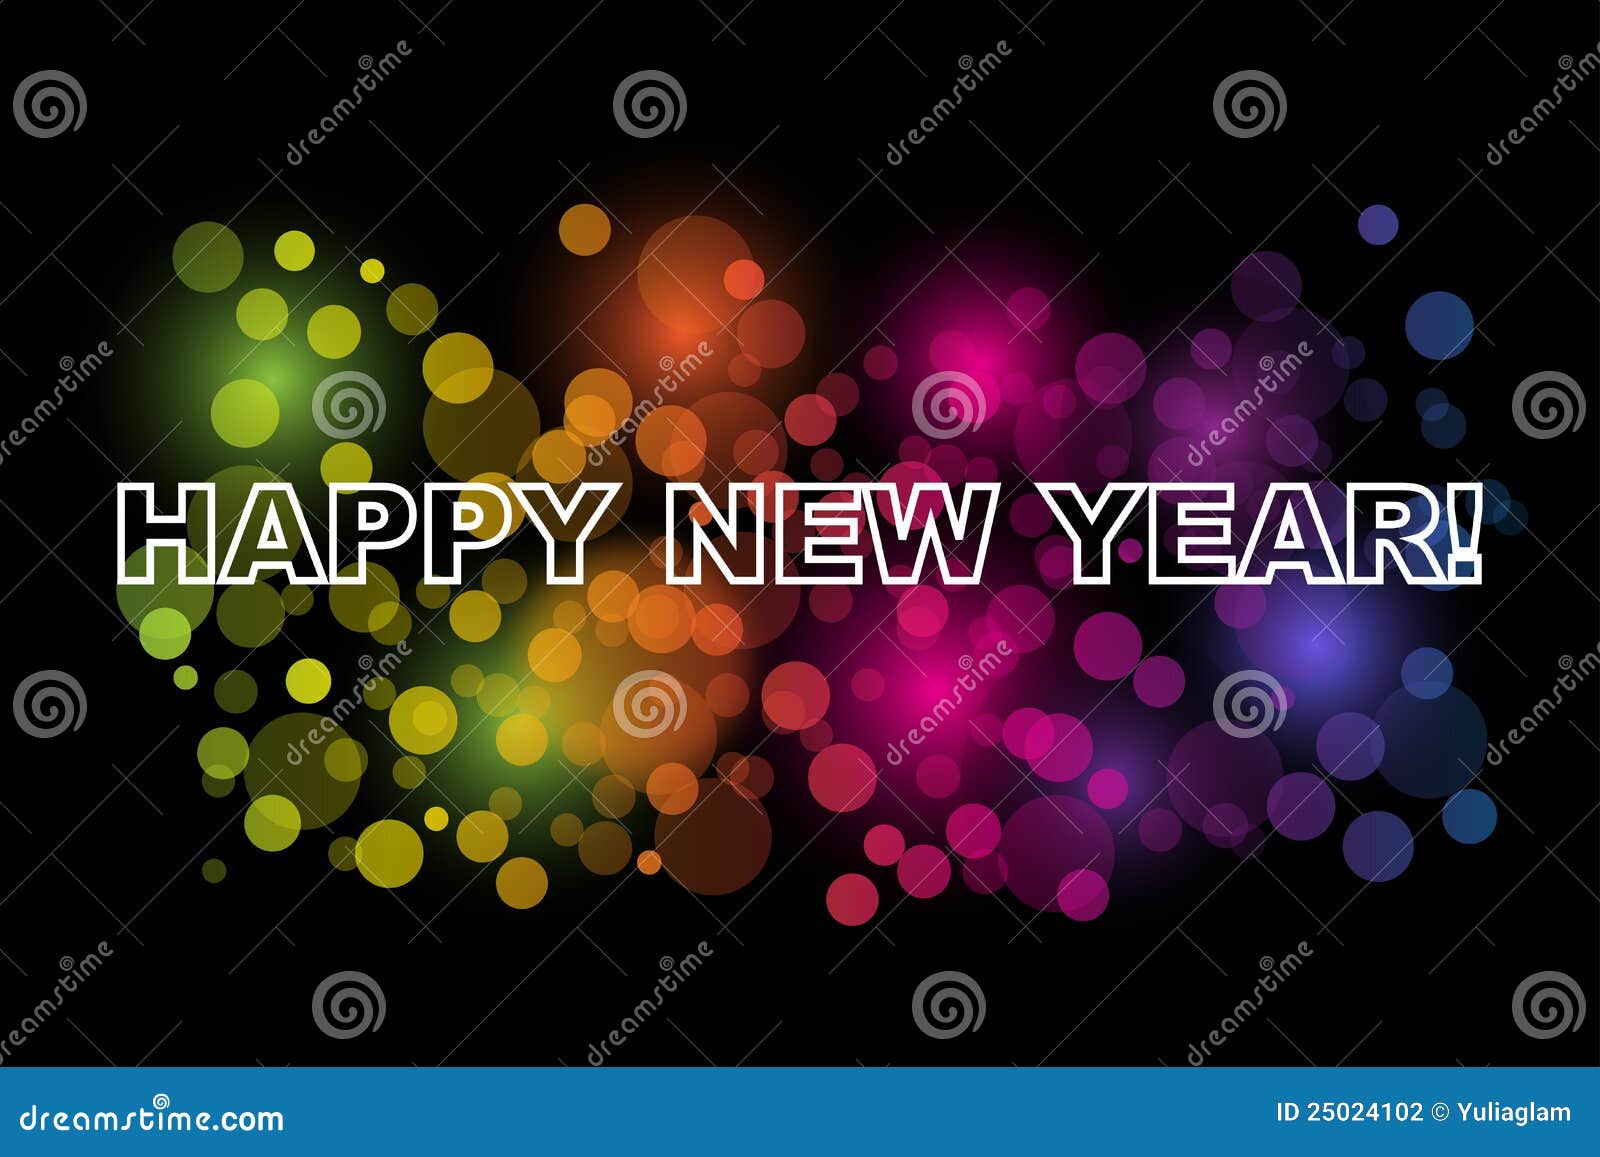 New Year background stock vector. Illustration of abstract - 25024102